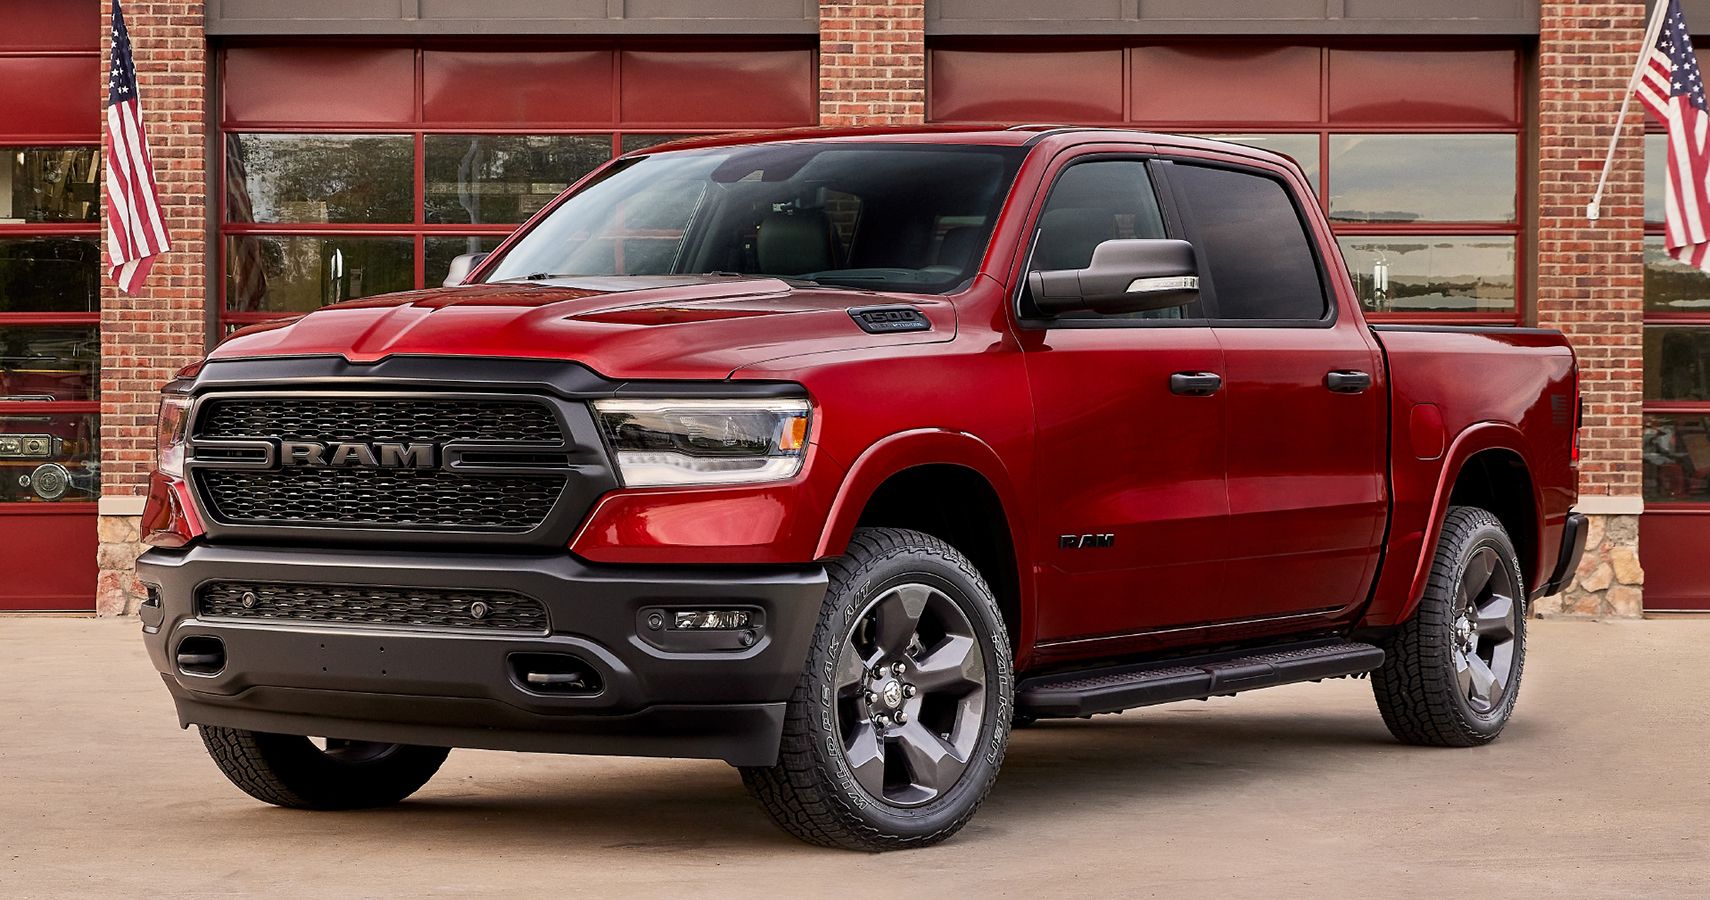 2022 Ram 1500 in red front view